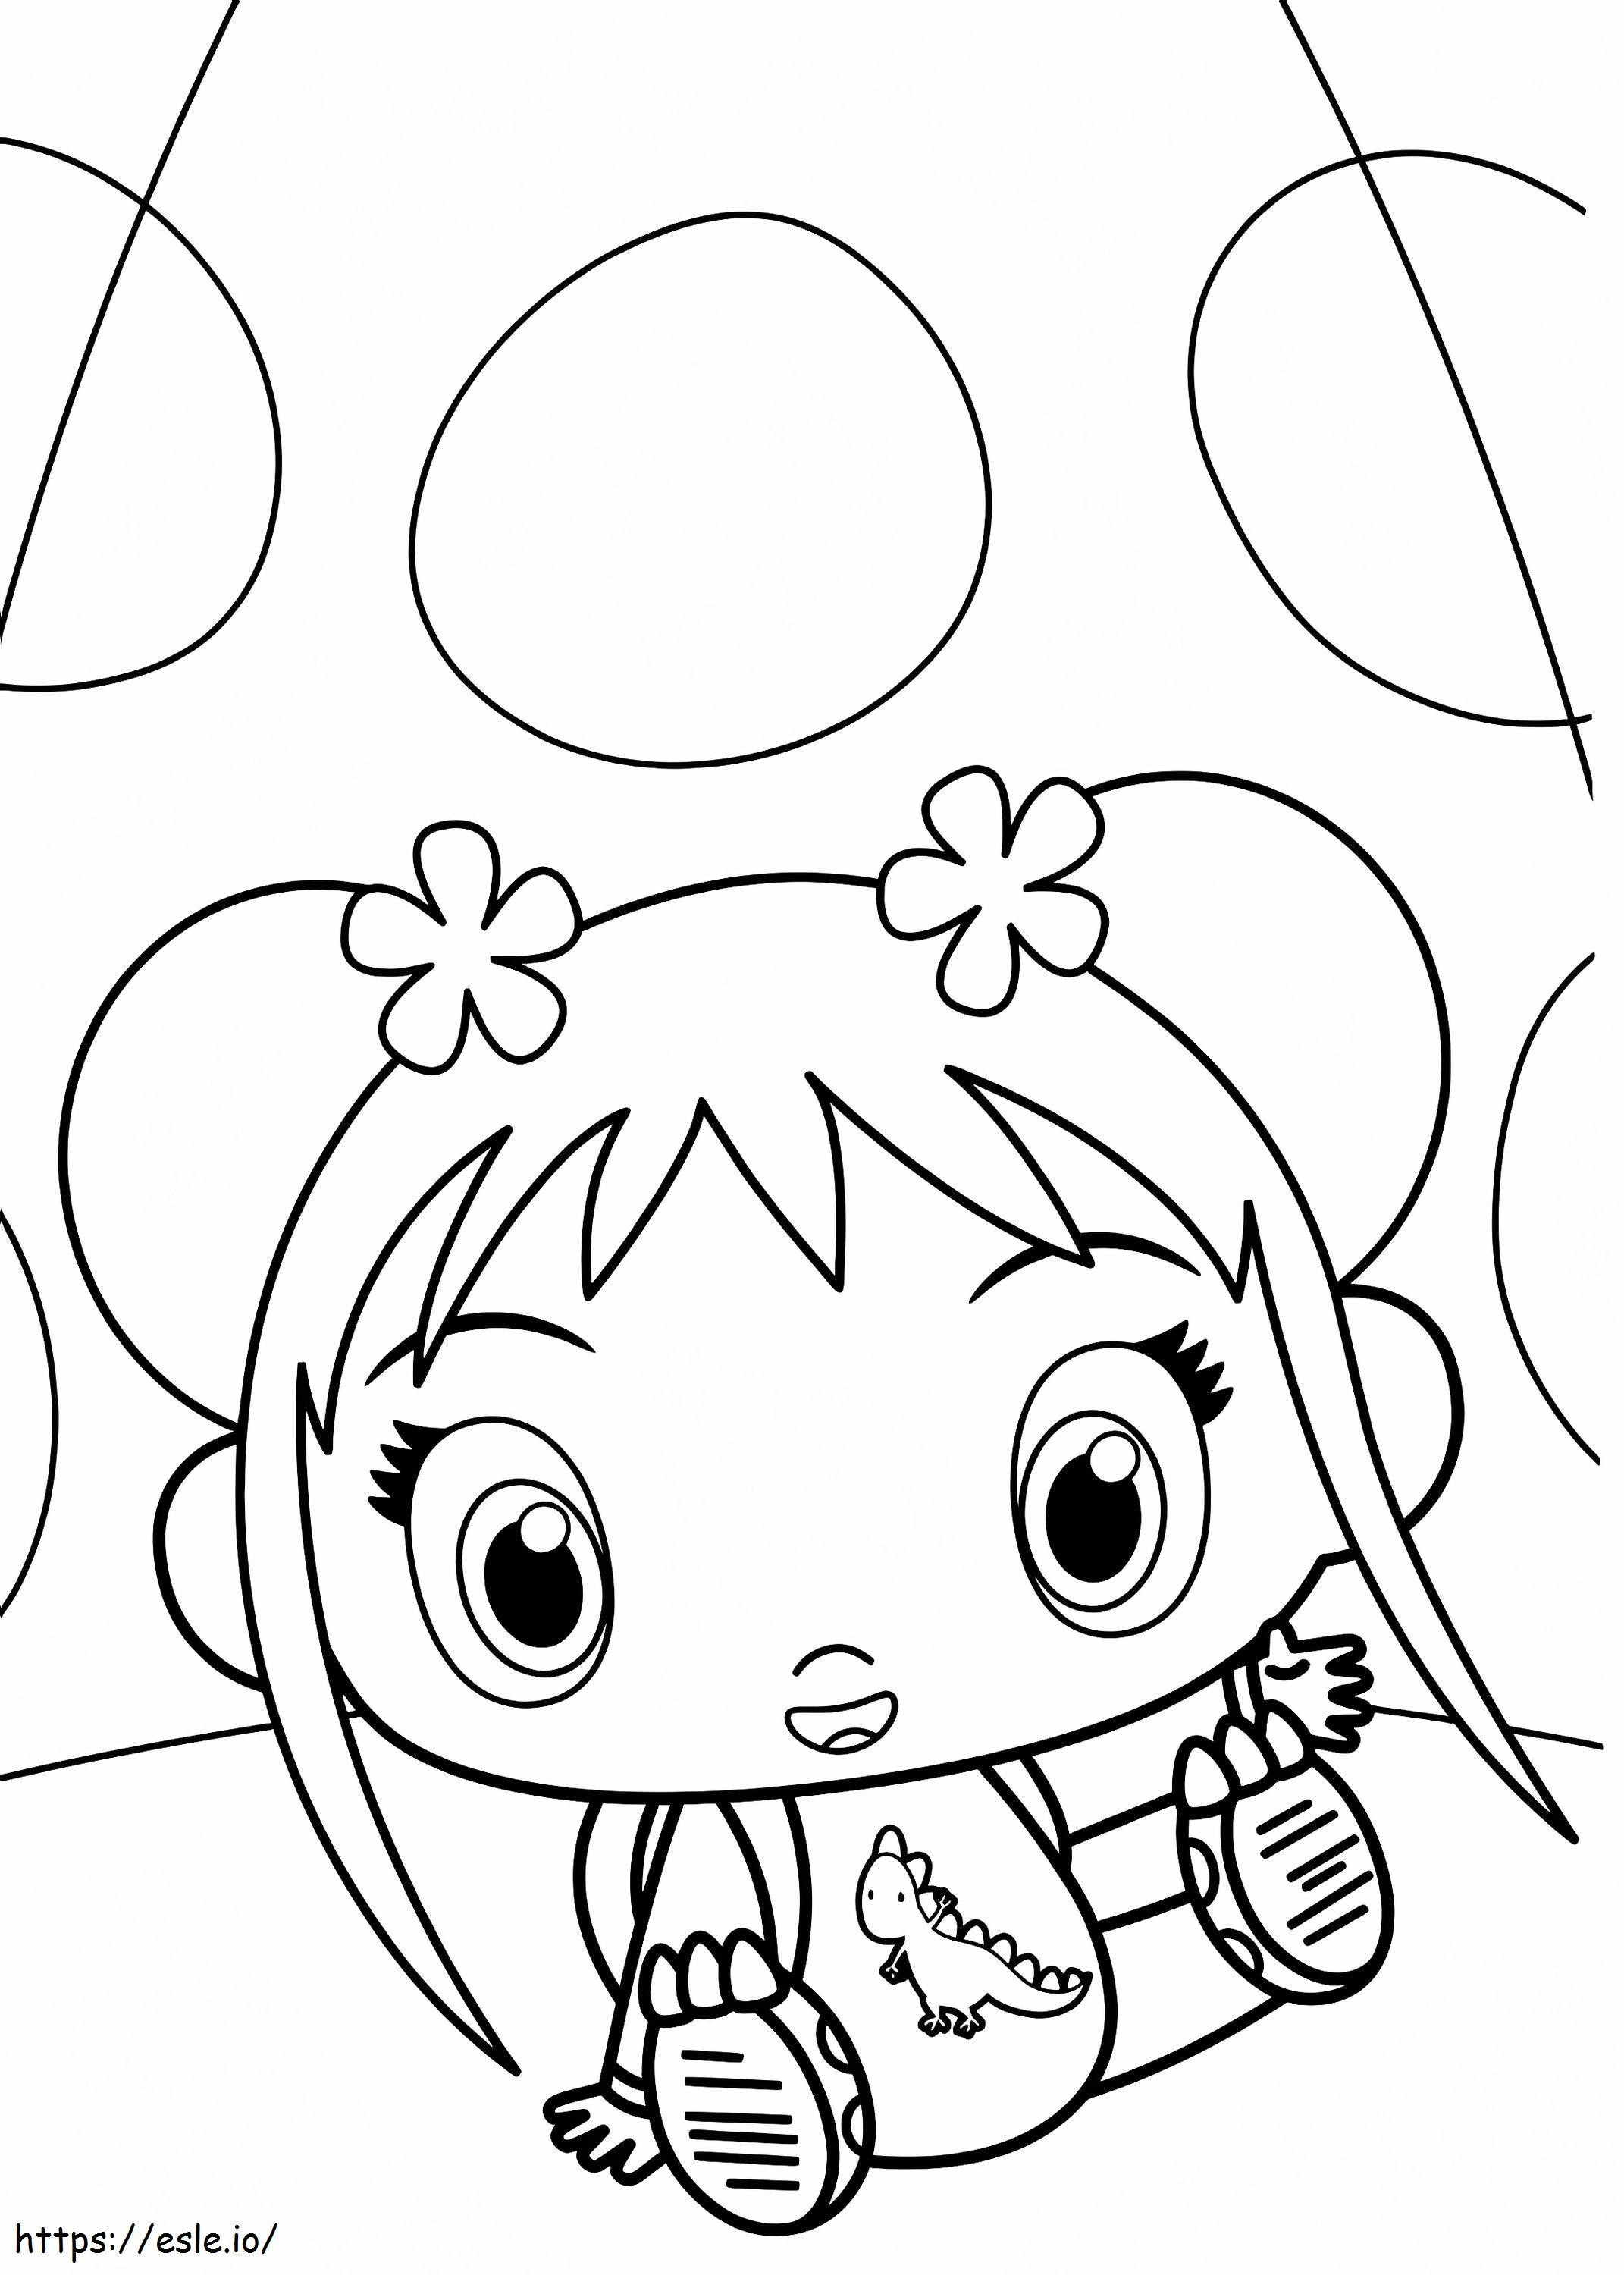 Wood And Wood coloring page